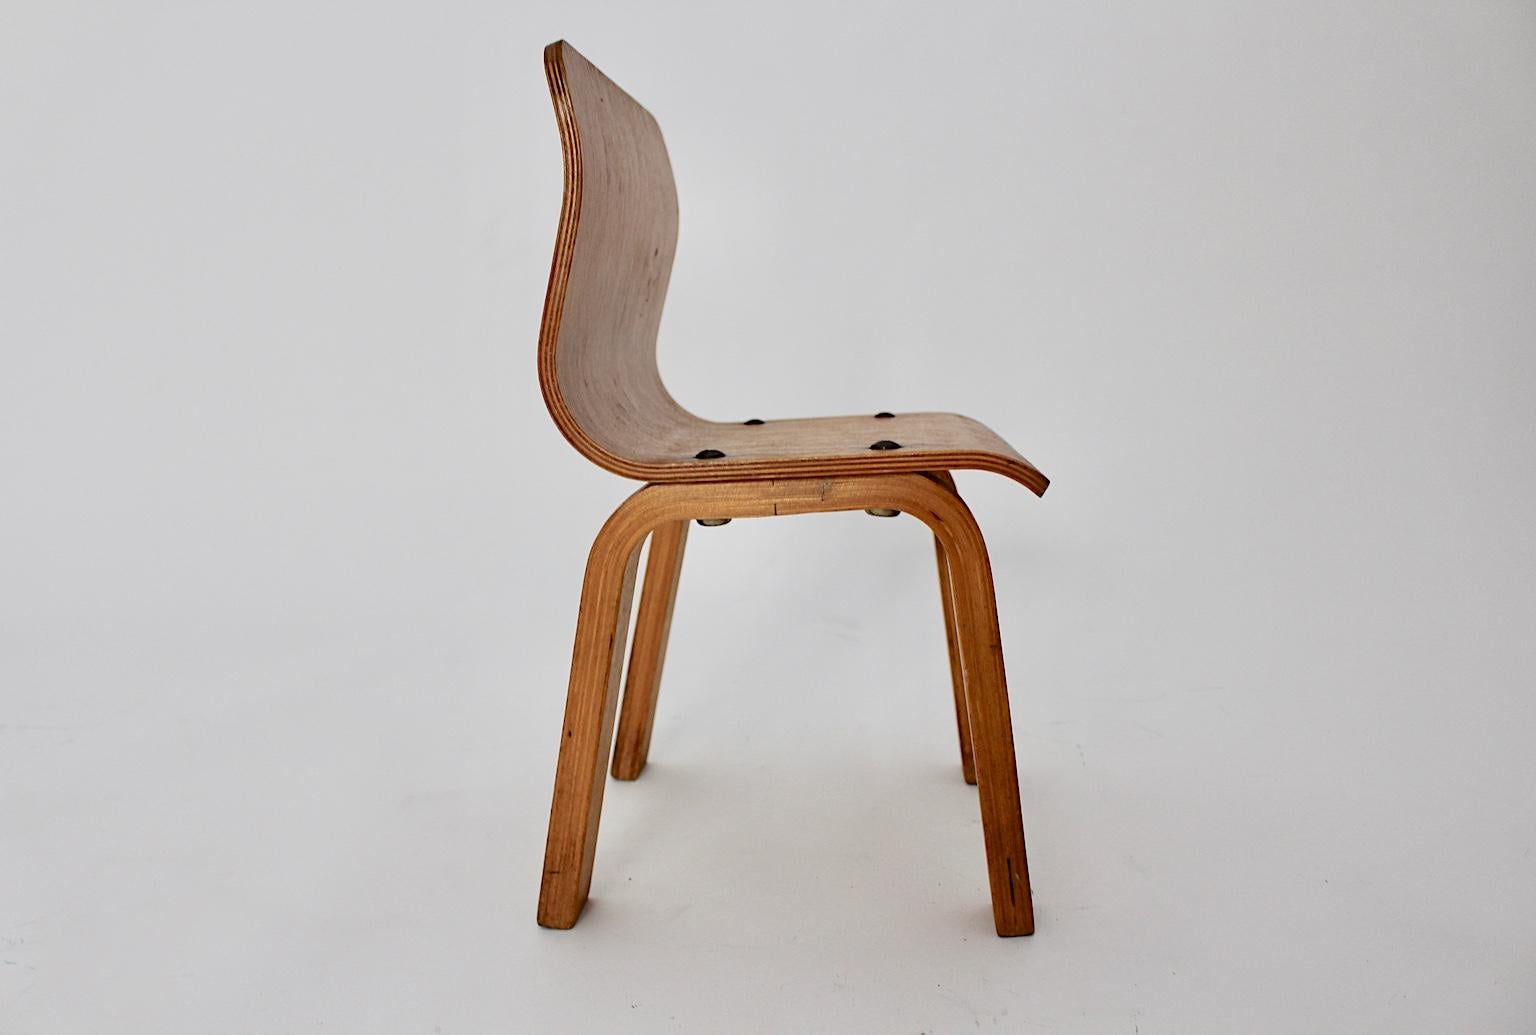 Scandinavian modern birch vintage children chair in clear design, which was produced in the 1950s.
The birch plywood seat shell is connected with metal screws onto the curved legs.
Also the children chair is carefully cleaned and in very good